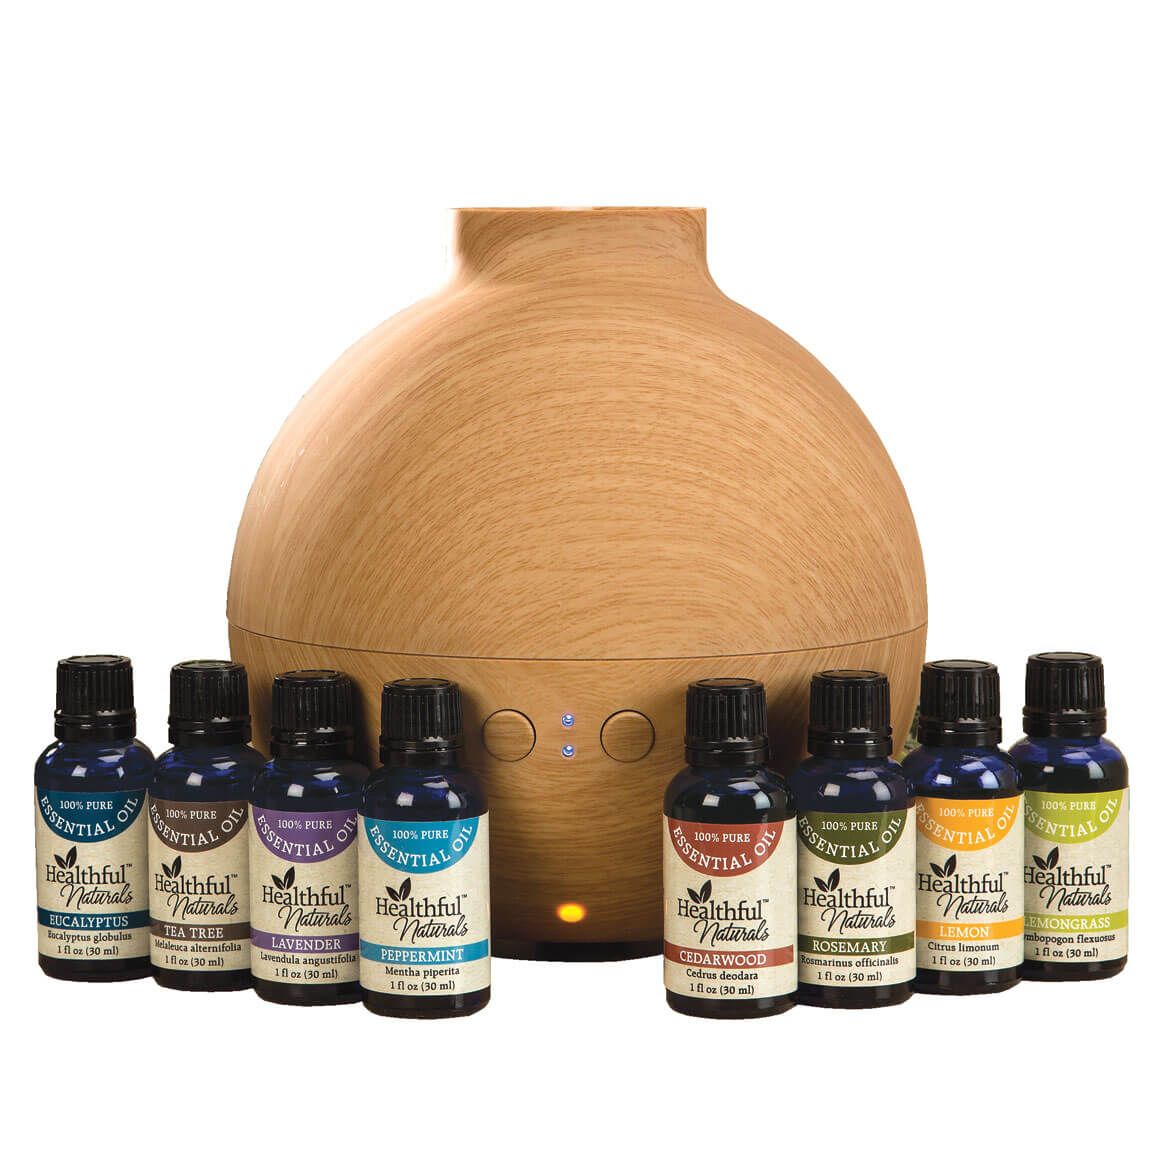 Healthful™ Naturals Deluxe Essential Oil Kit & 600 ml Diffuser + '-' + 356538